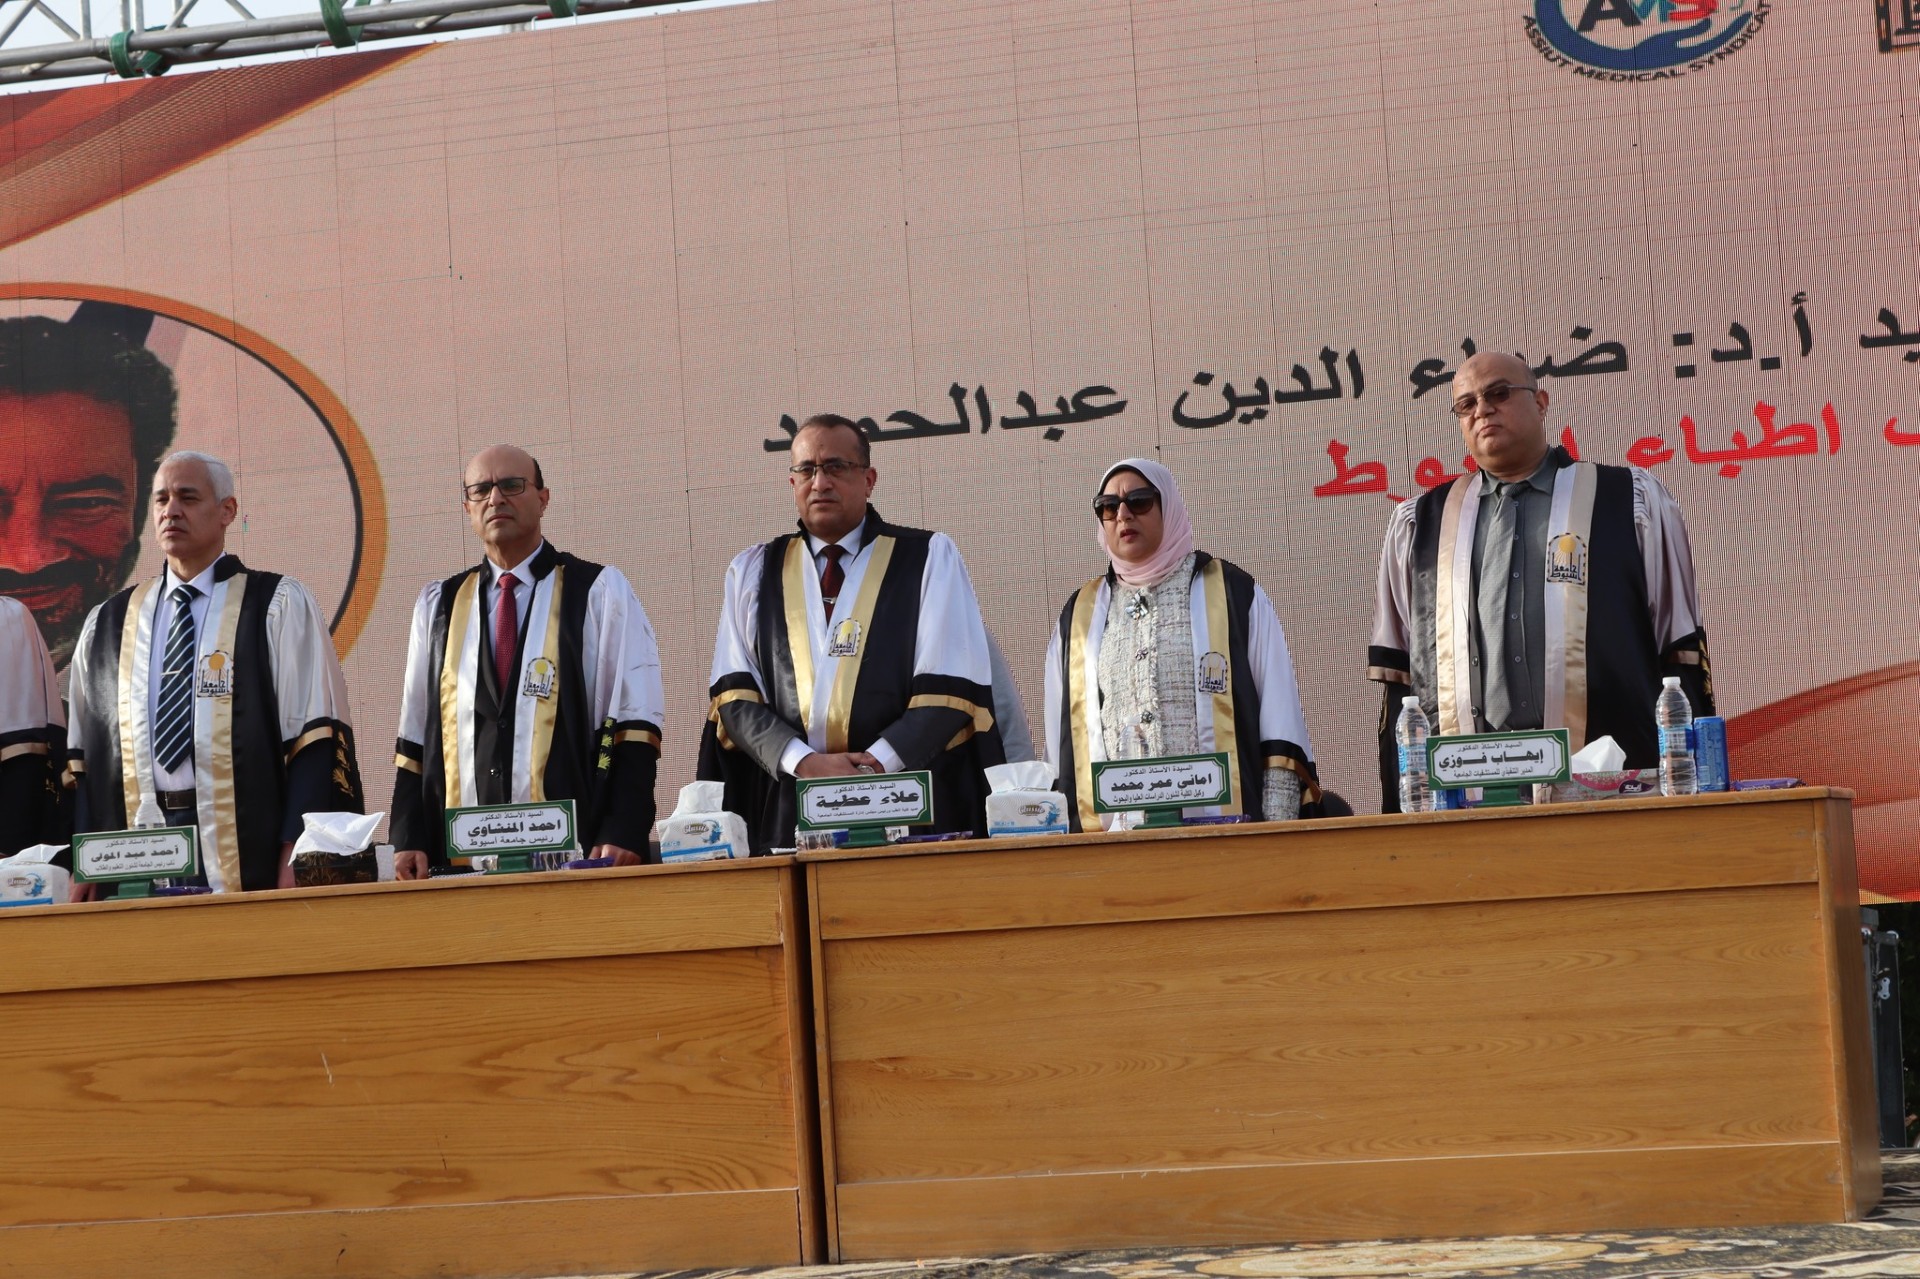 The Faculty of Medicine at Assiut University celebrates the graduation of its 57th batch.